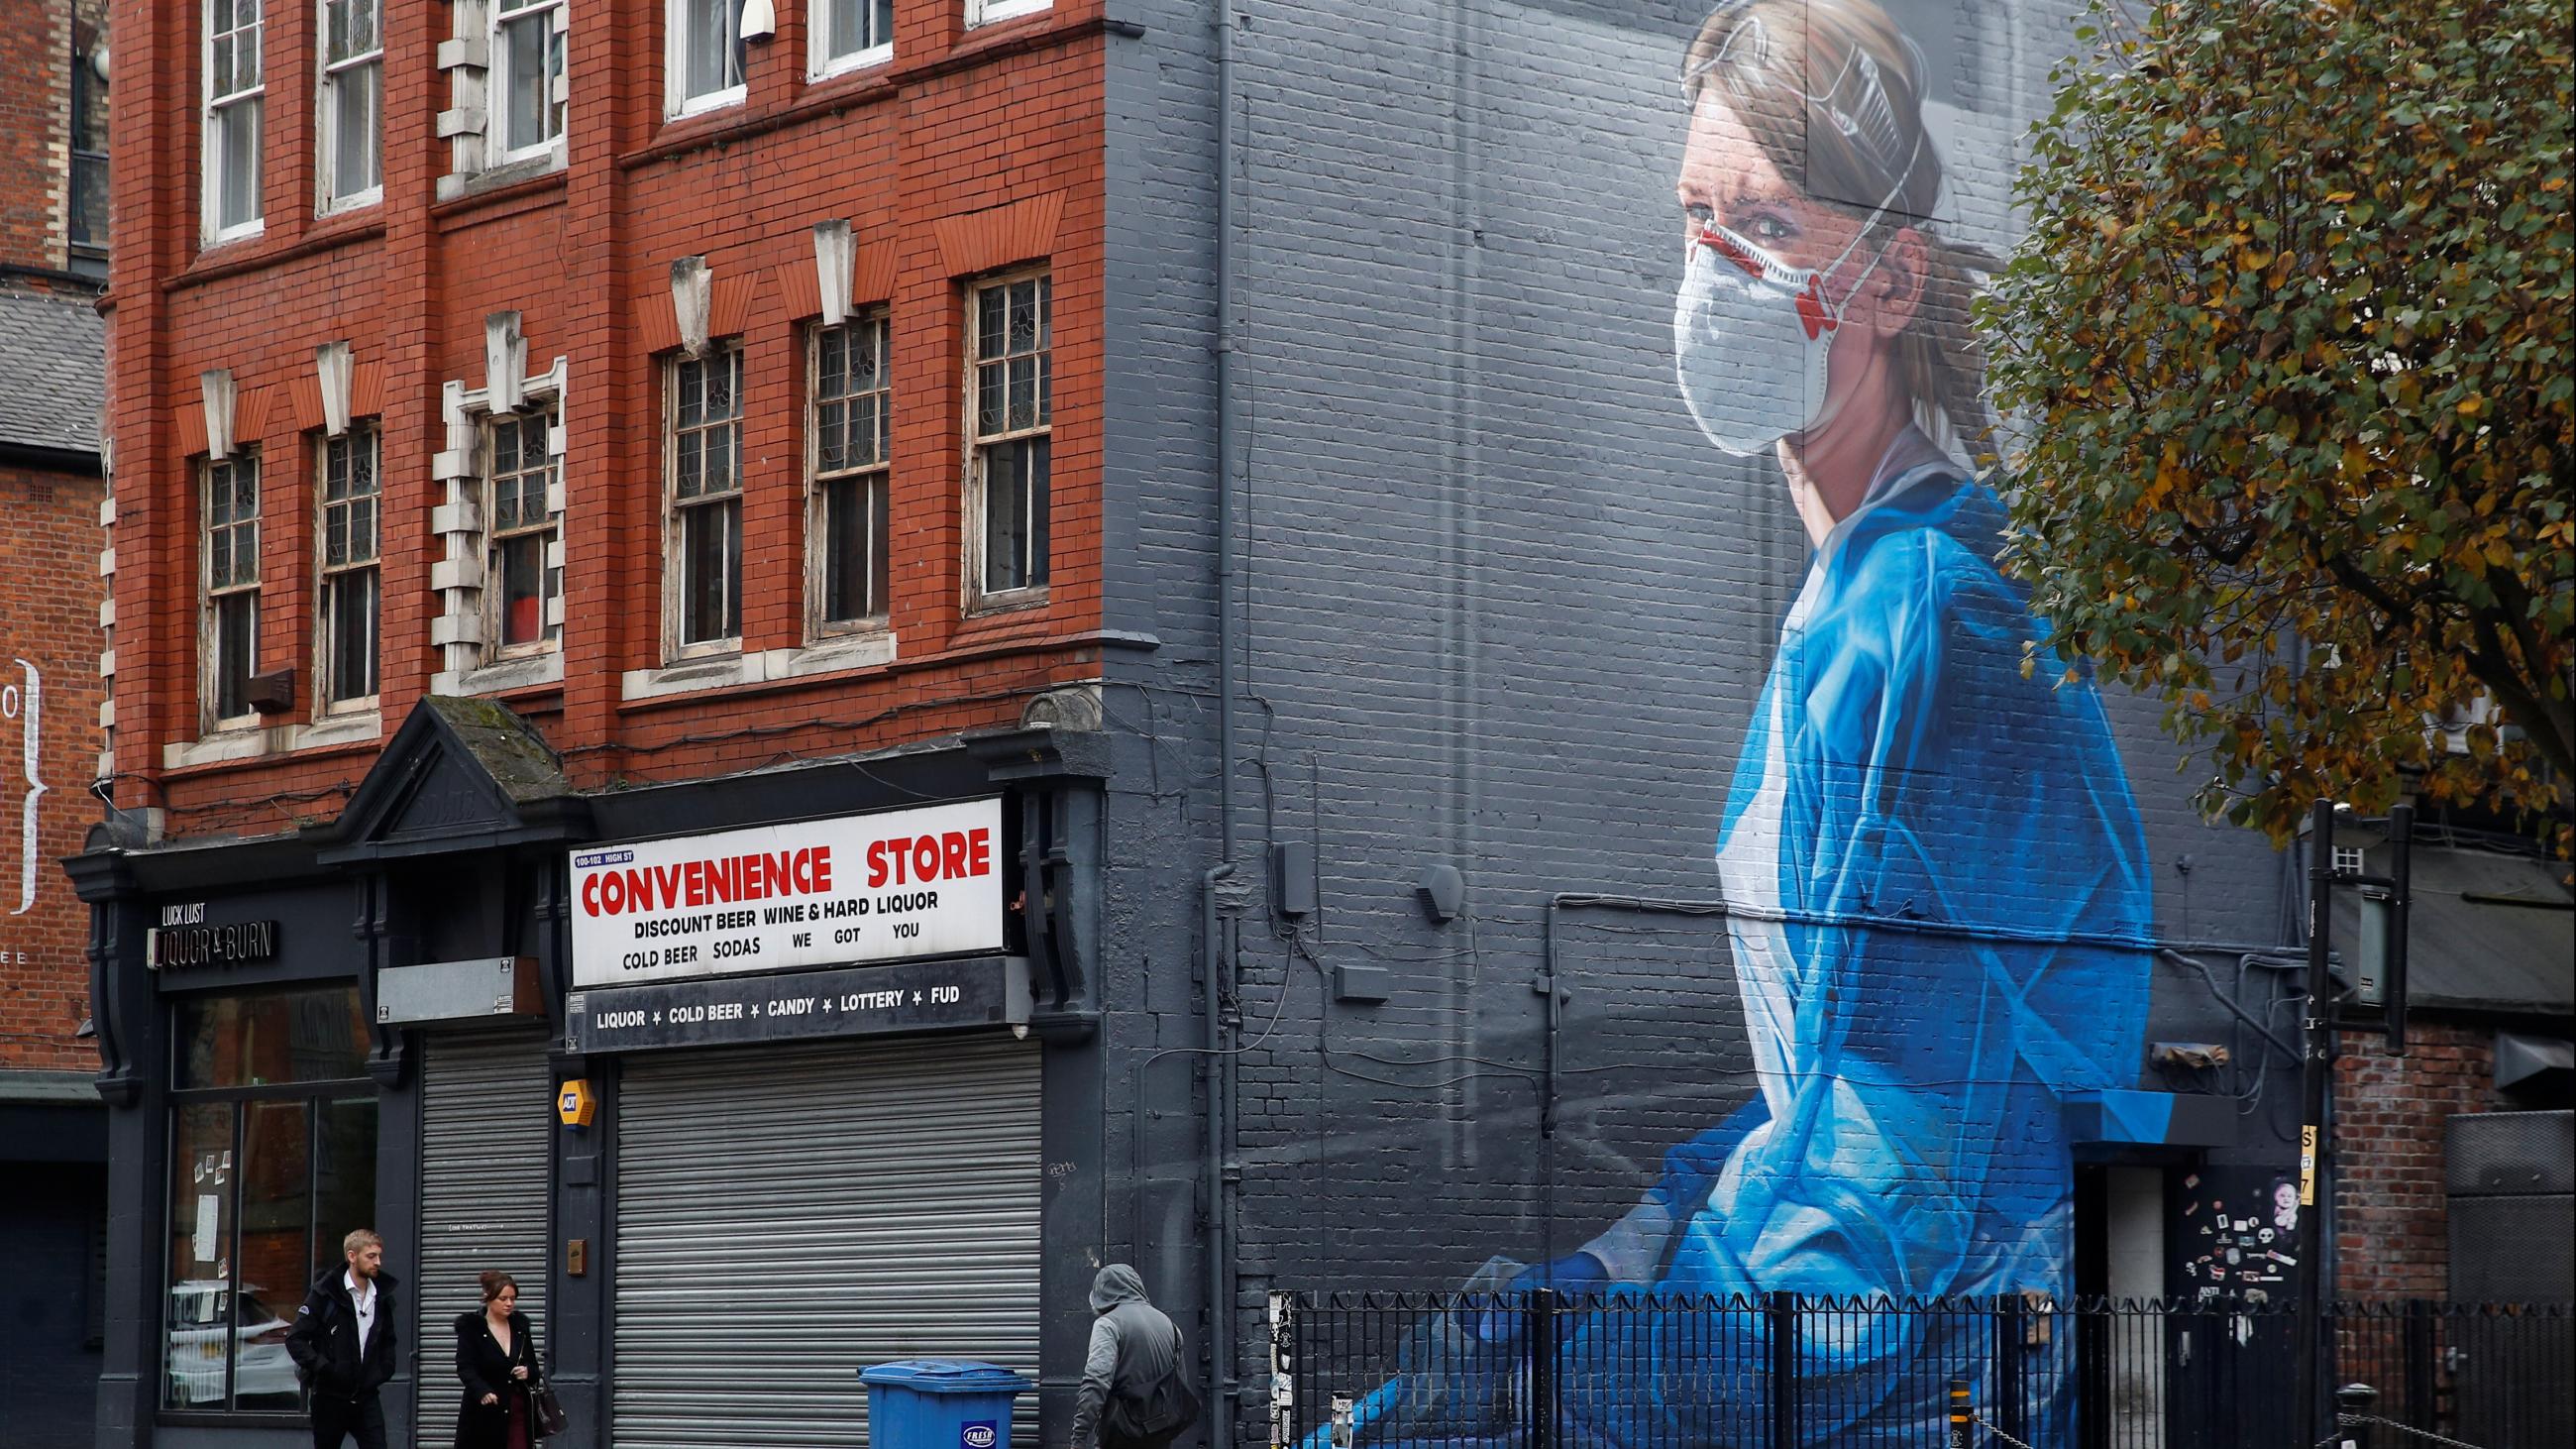 A mural of a health-care worker climbs three stories high along the side of a building in Manchester, United Kingdom, on October 19, 2020.